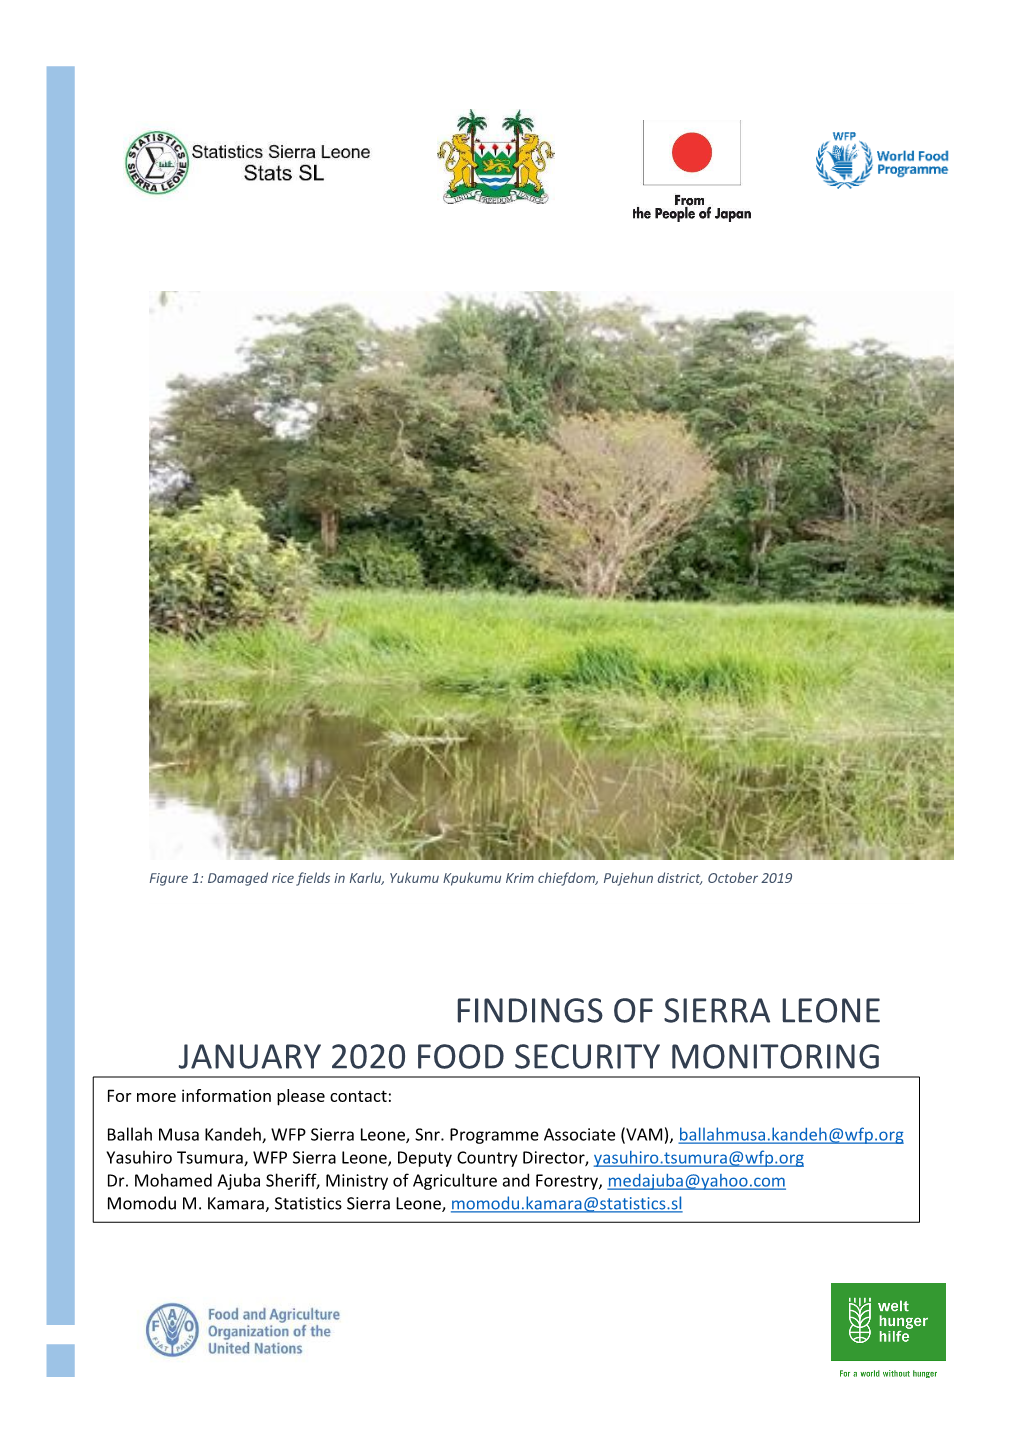 FINDINGS of SIERRA LEONE JANUARY 2020 FOOD SECURITY MONITORING for More Information Please Contact: Ballah Musa Kandeh, WFP Sierra Leone, Snr